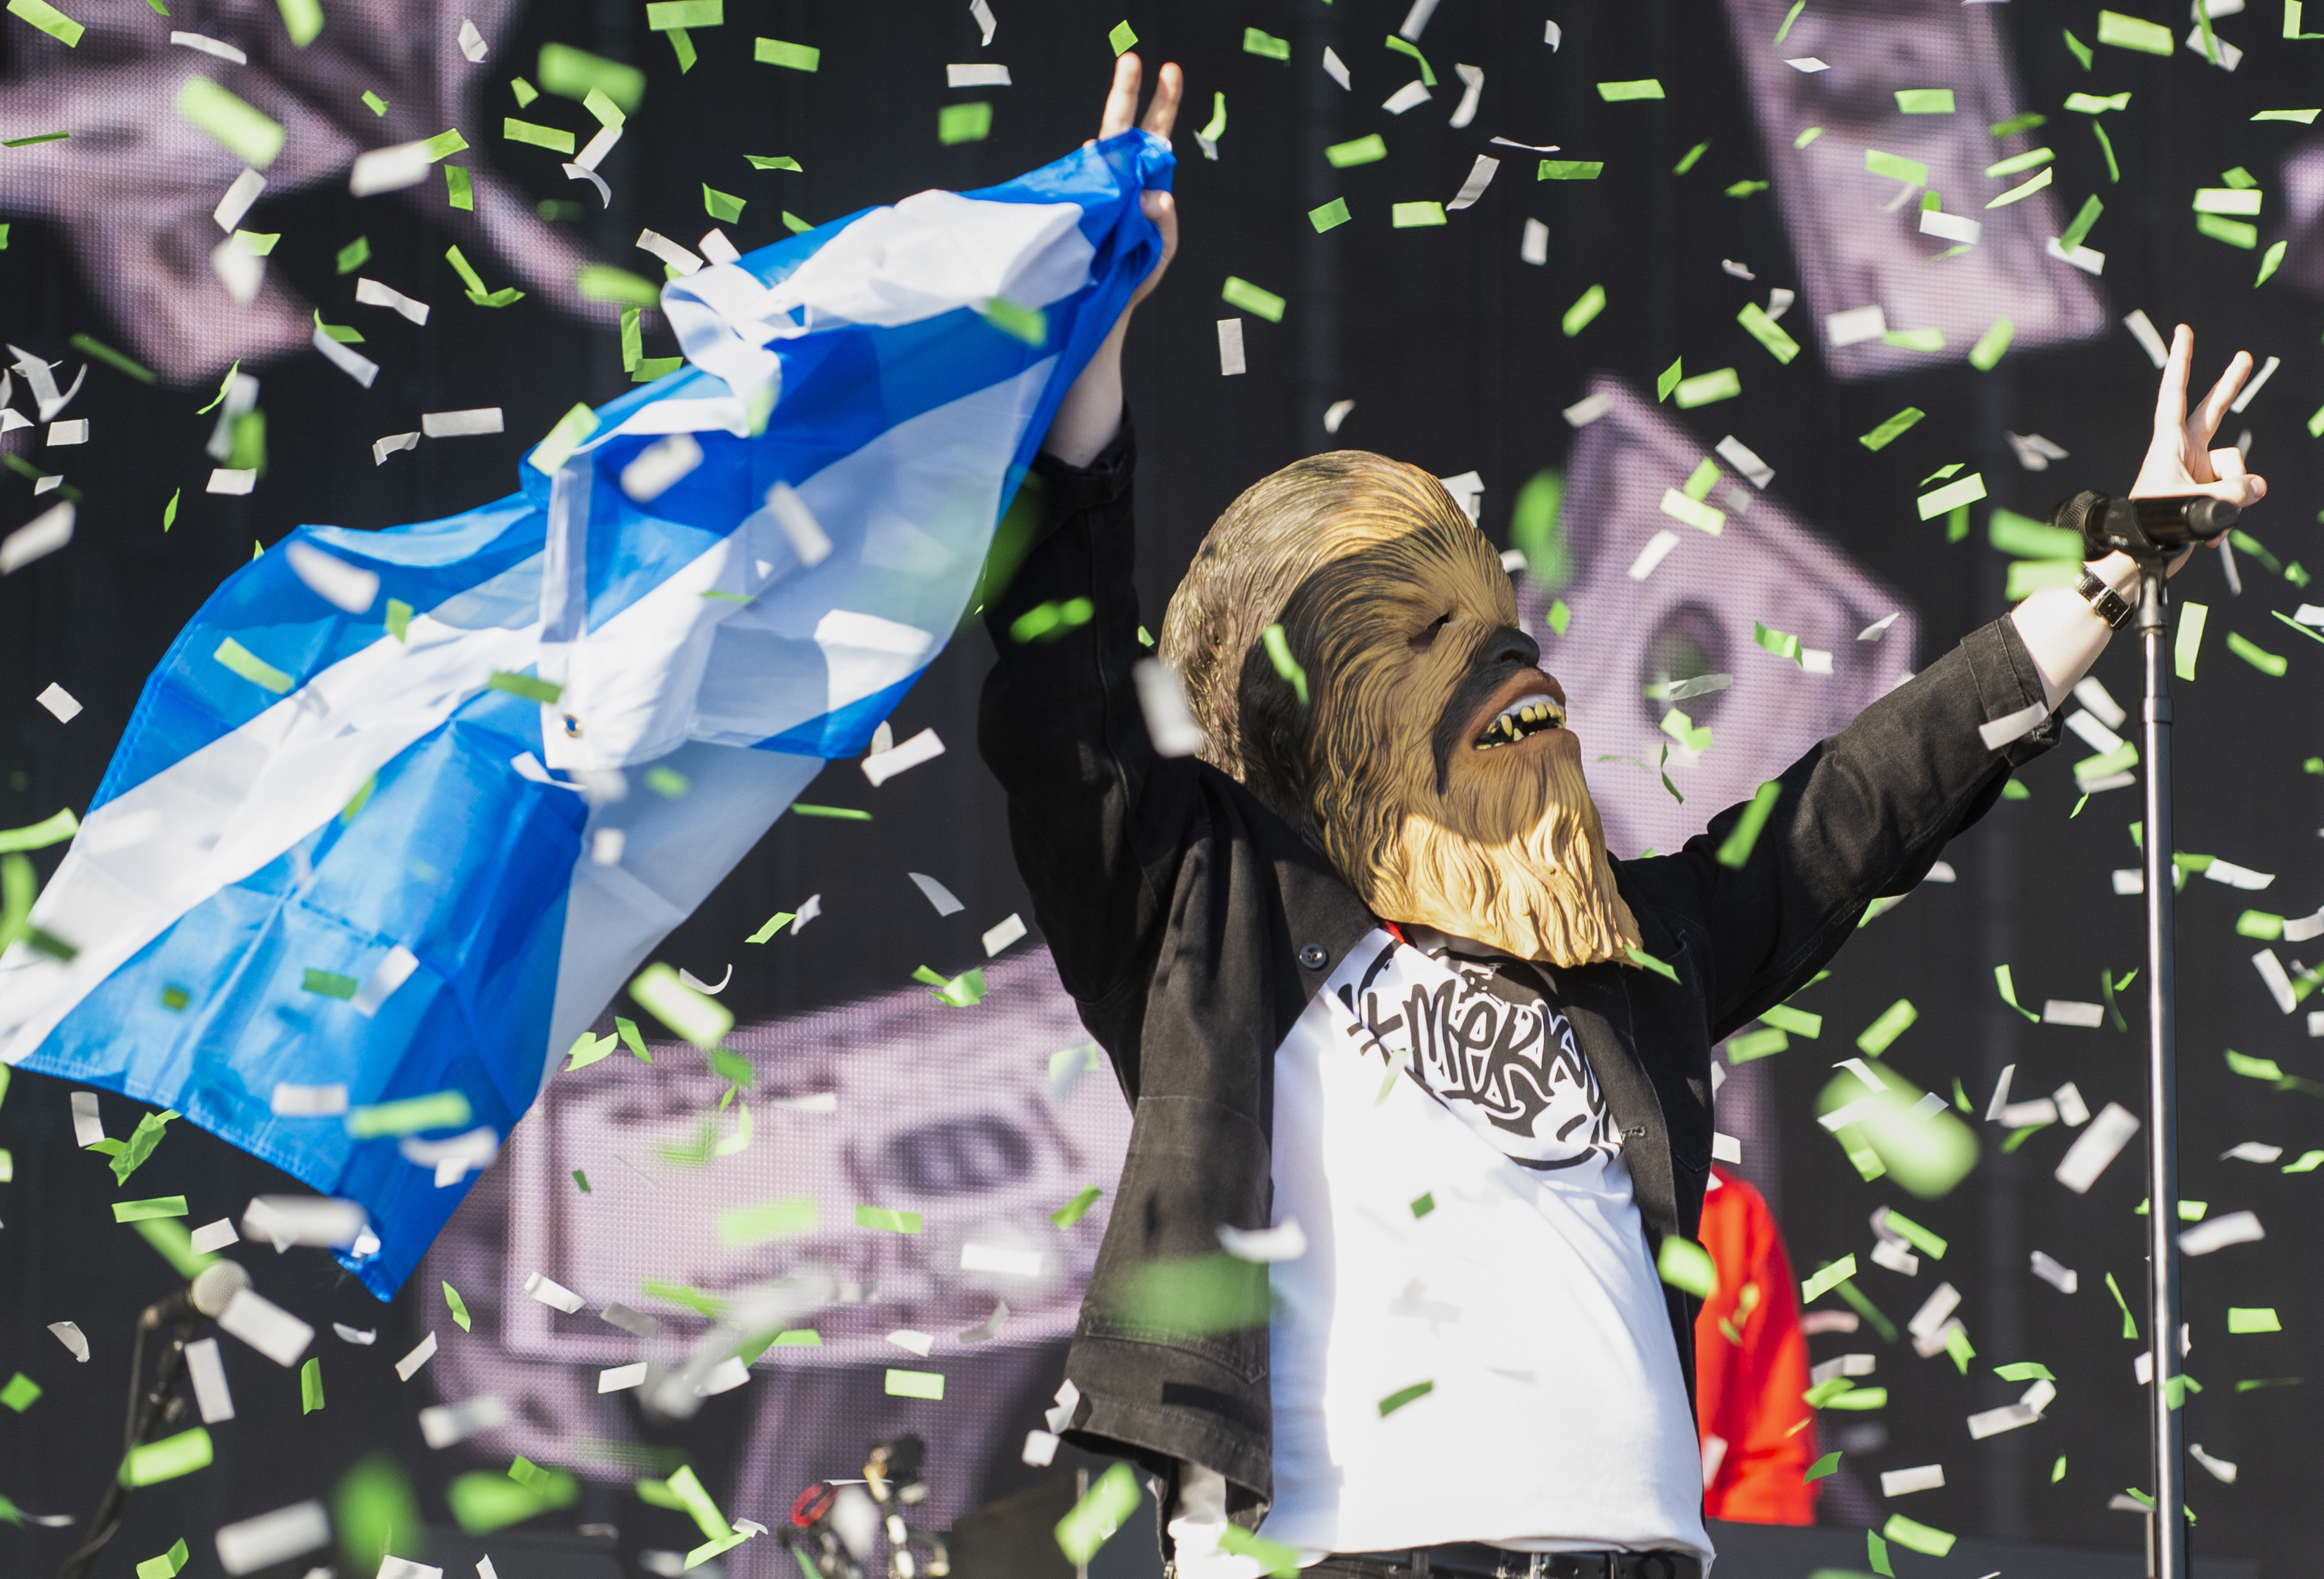 Lewis Capaldi on the Main Stage wearing a Chewbacca during the TRNSMT festival at Glasgow Green, Scotland. The signed mask has raised more than £5,000 for charity just 12 hours after going up for auction on Ebay.